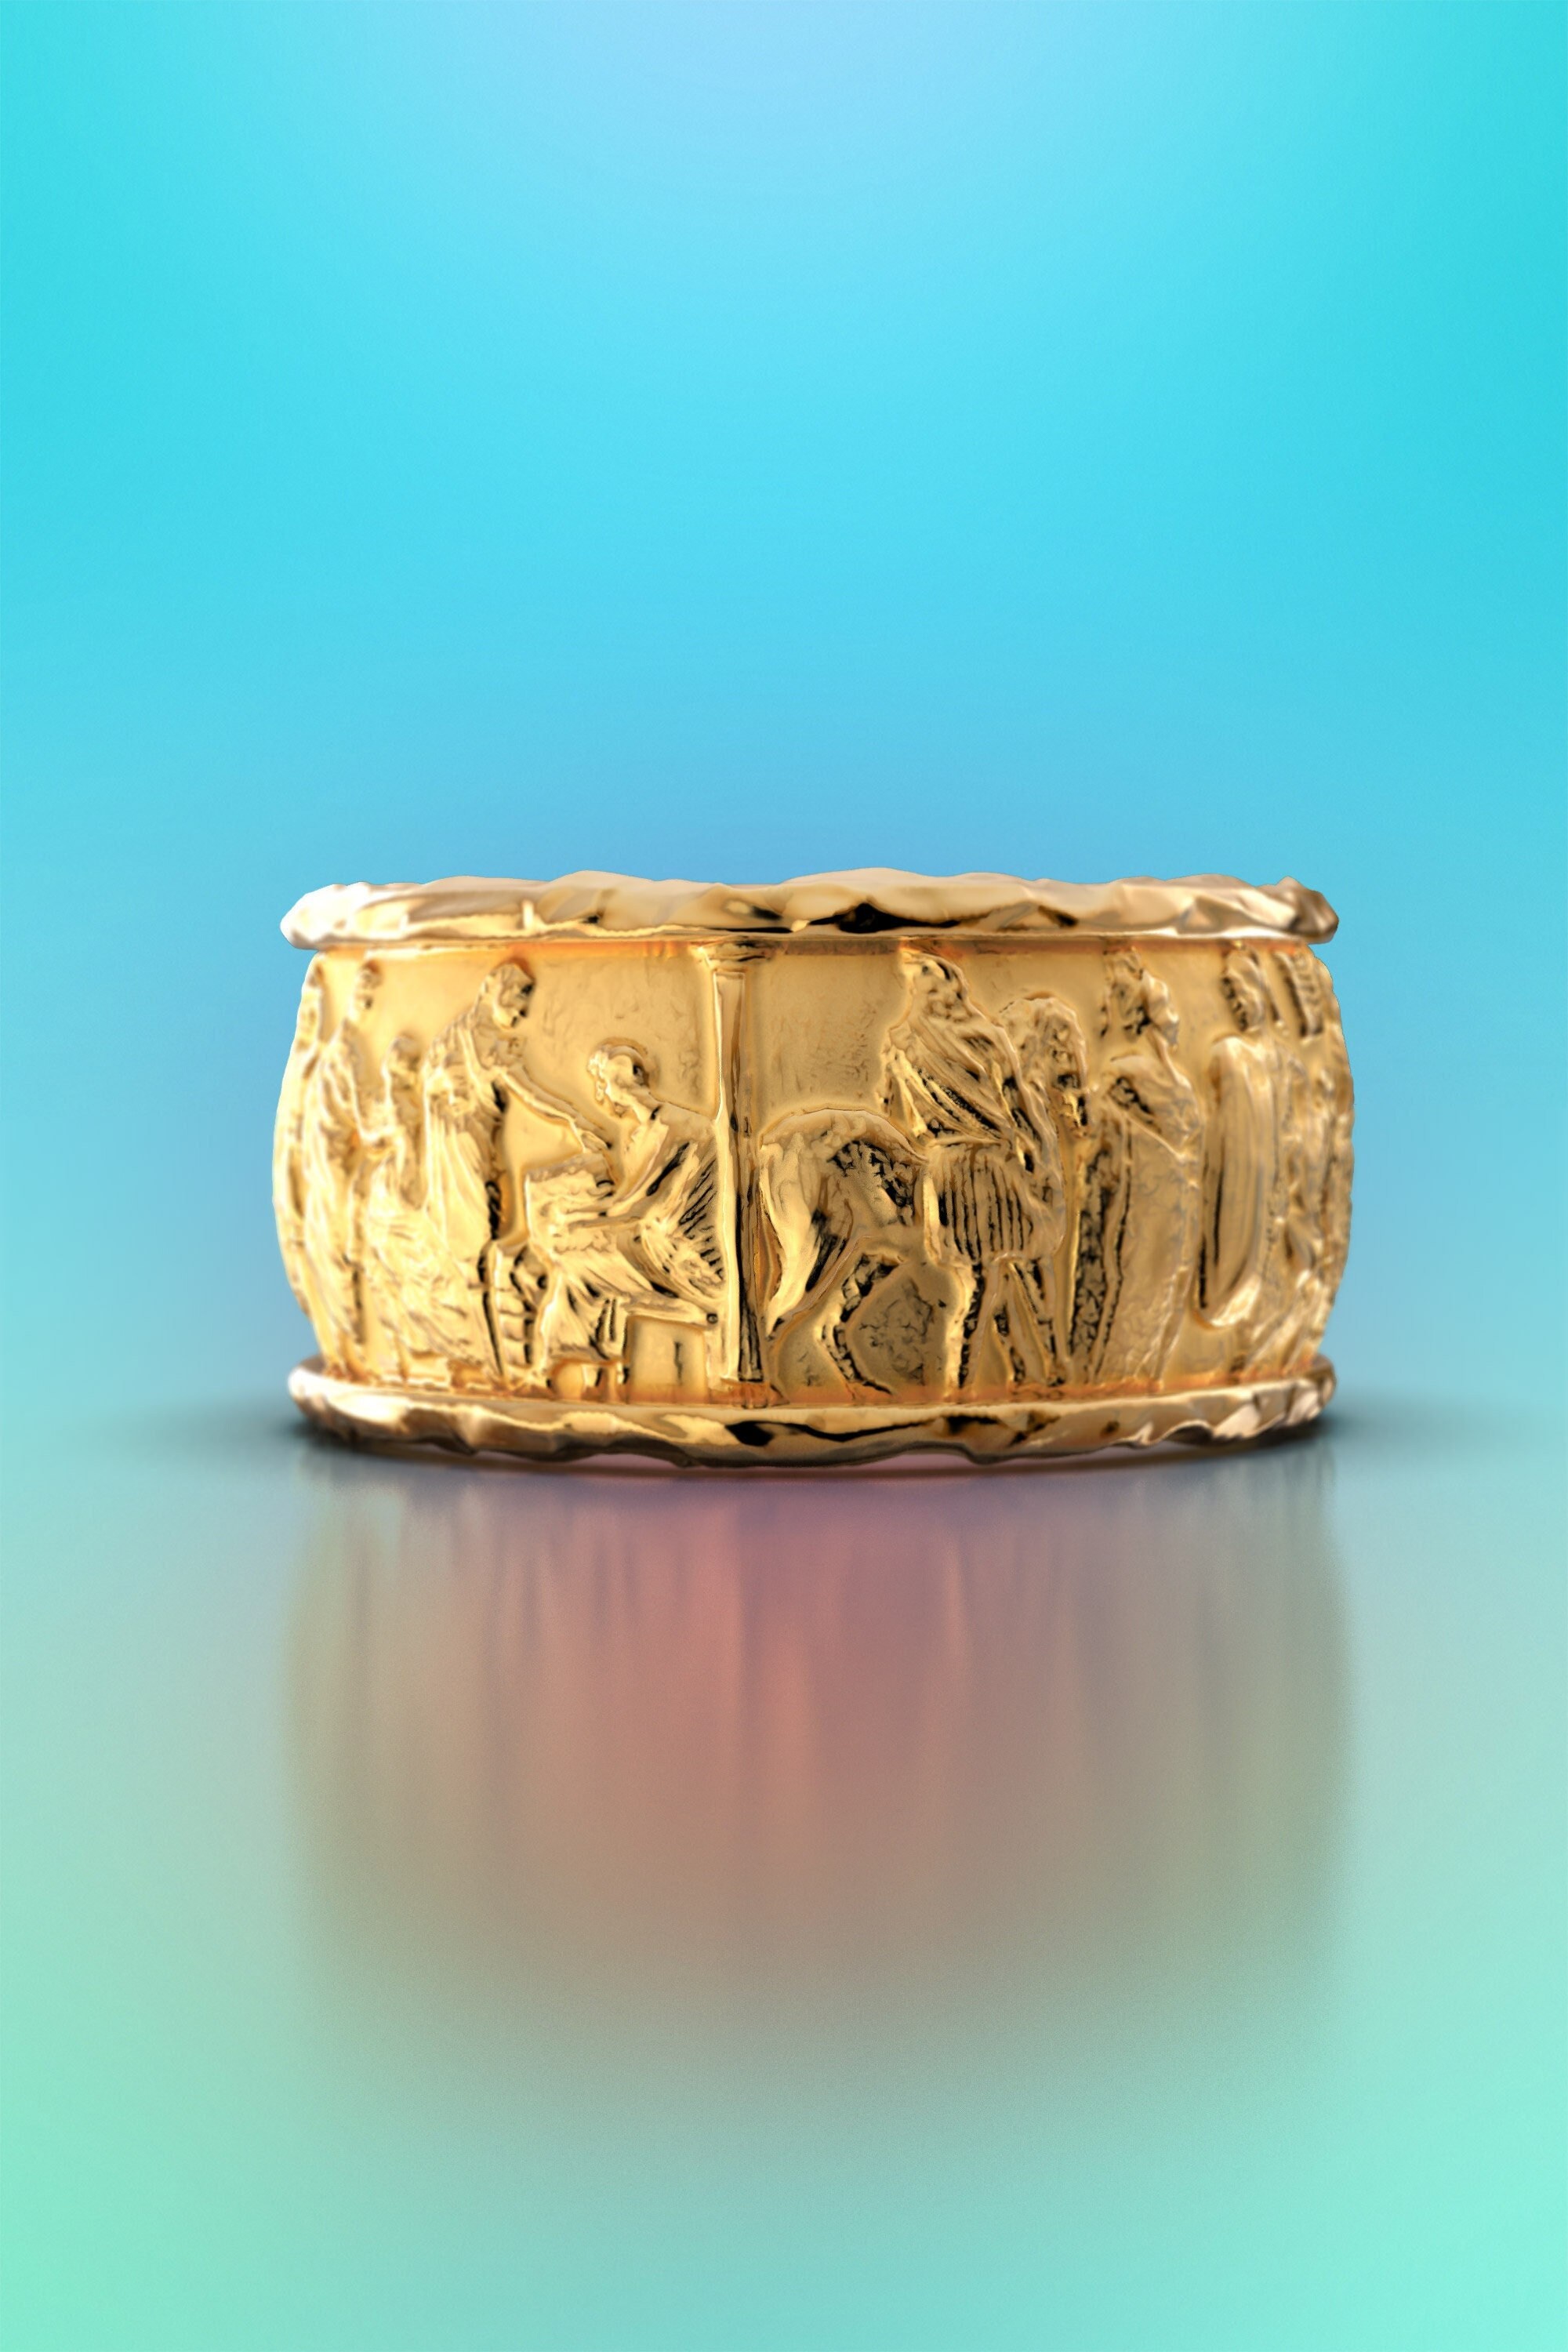 Sculptural Gold Ring Jewelry, 14K Carved Ring. 18K Solid Band Made in Italy, Bas Relief Italian Jewelry